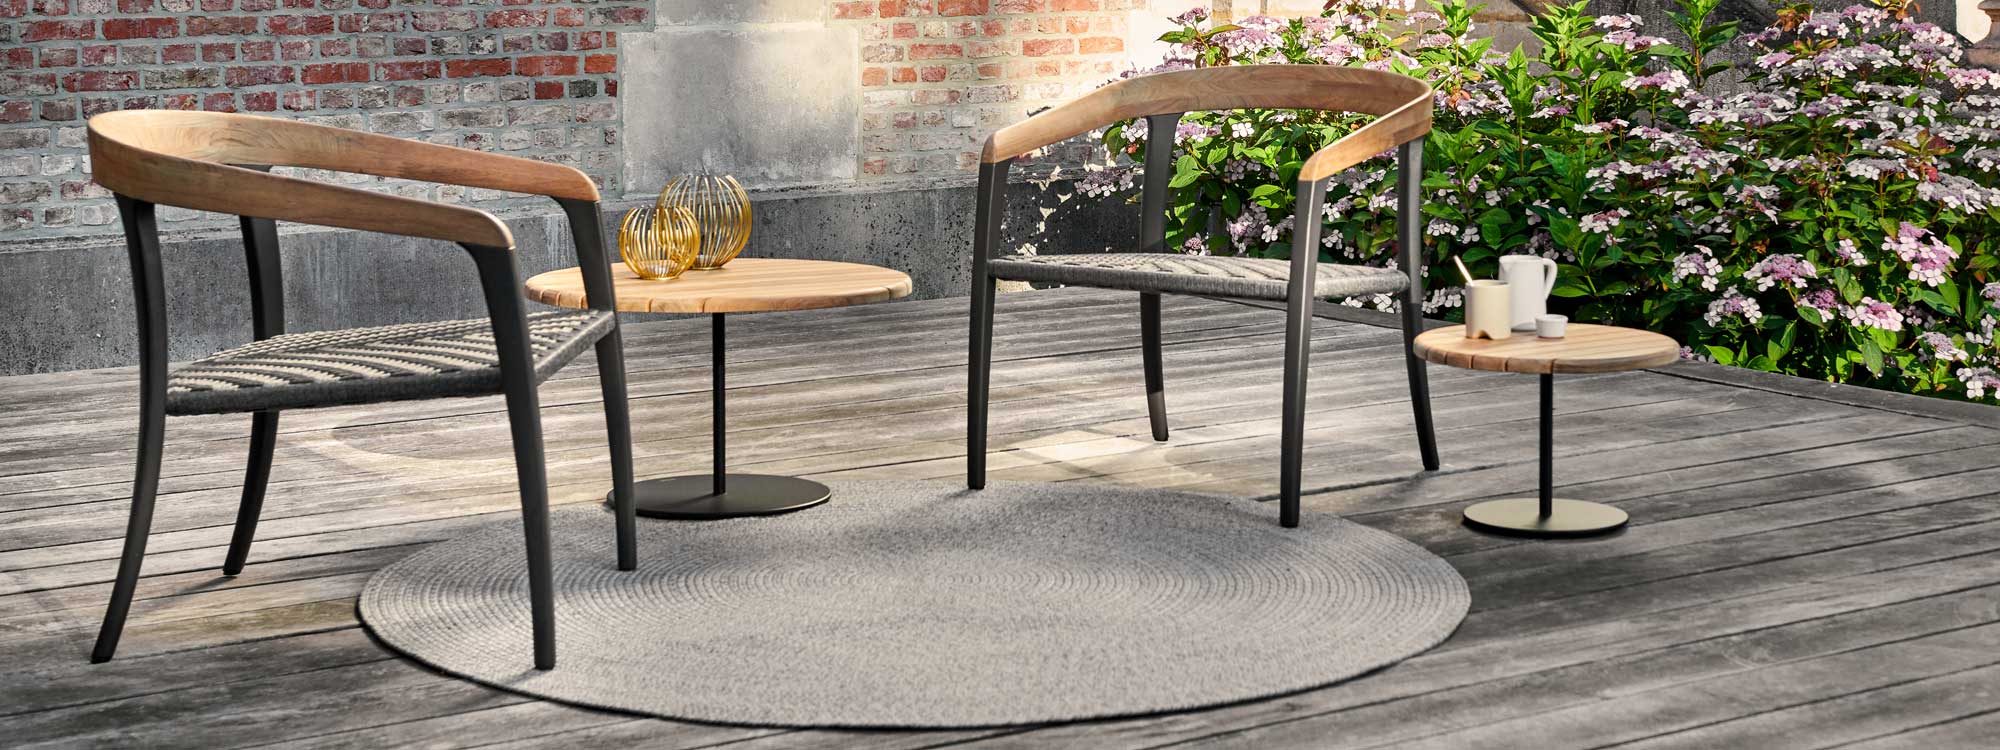 Image of Royal Botania Butler tables and Jive lounge chairs with anthracite frames and teak detail